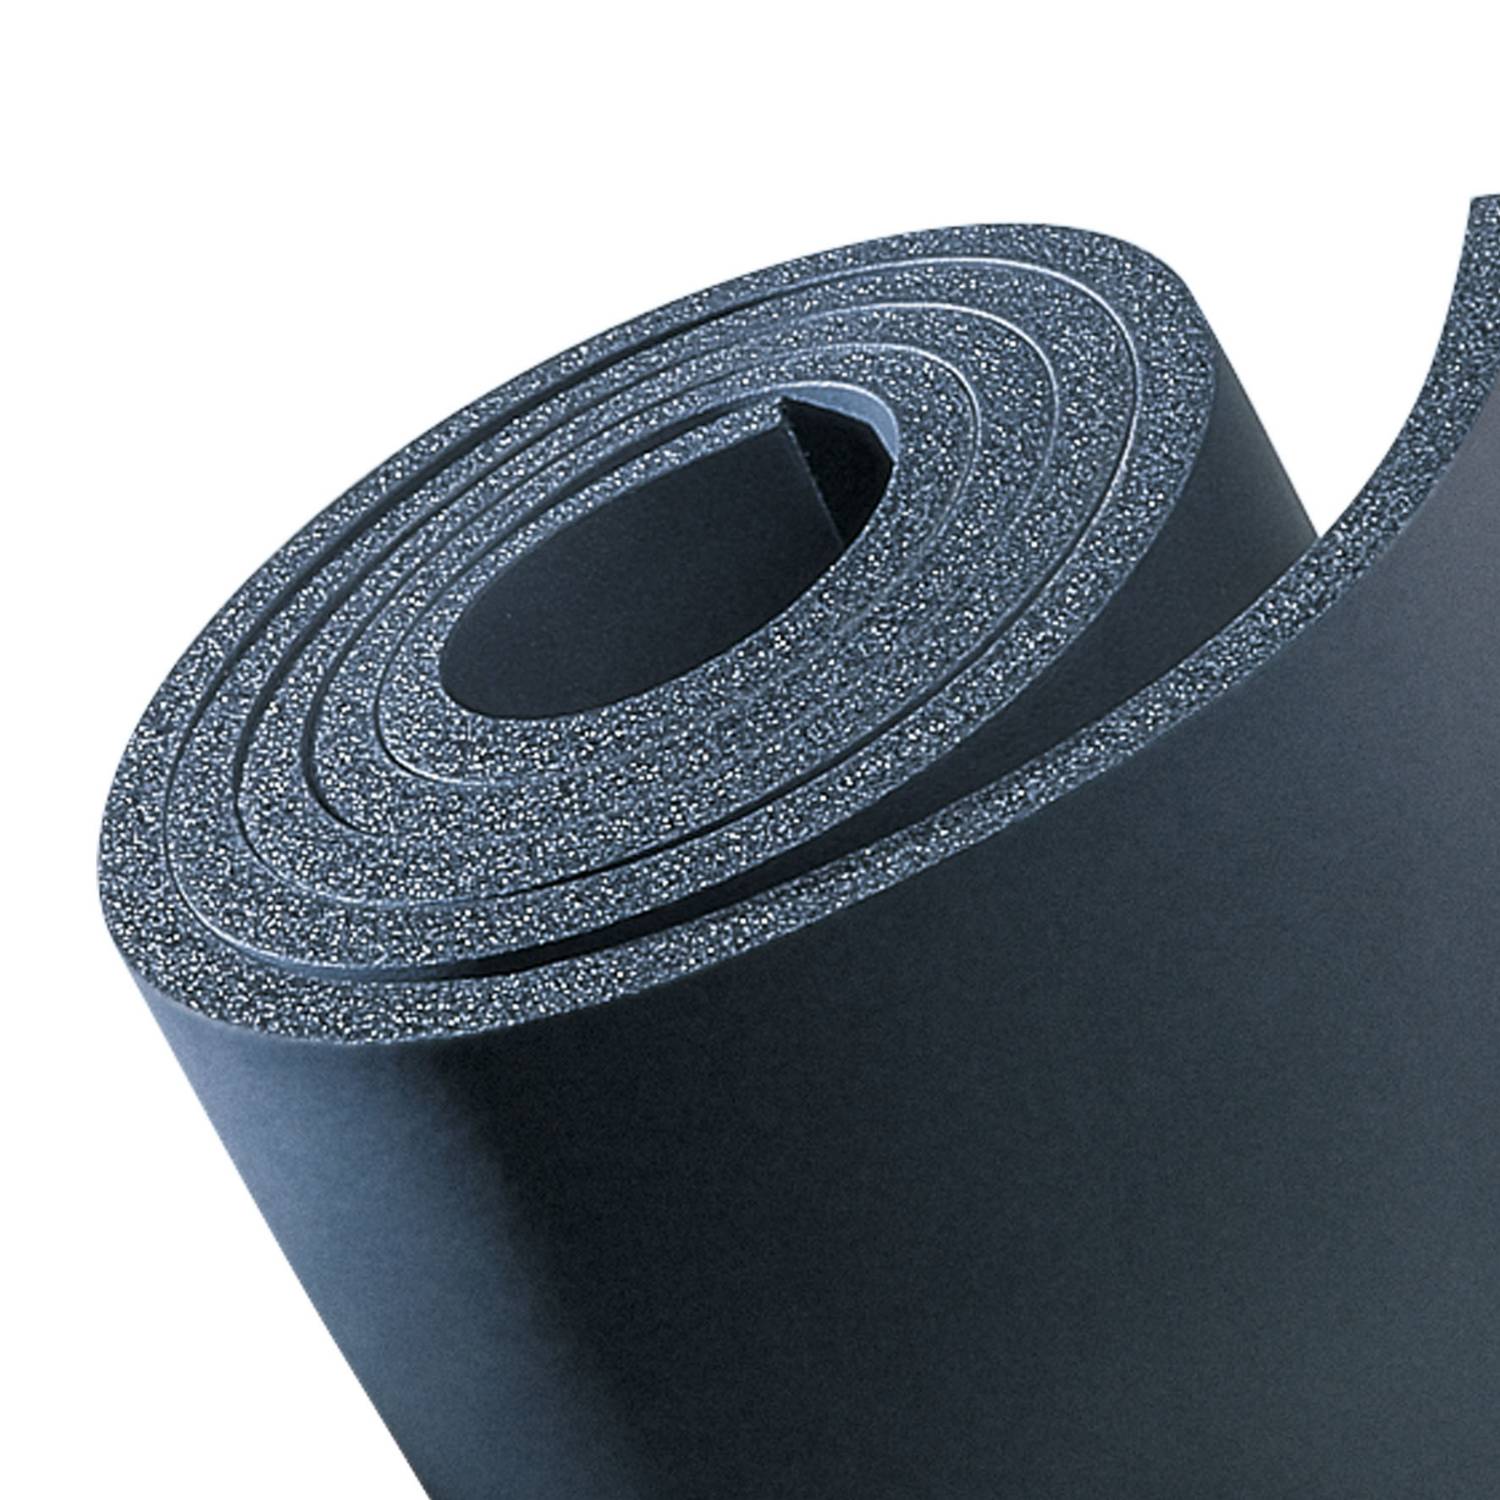 Kaiflex HFplus Continuous Sheet - Closed cell rubber insulation